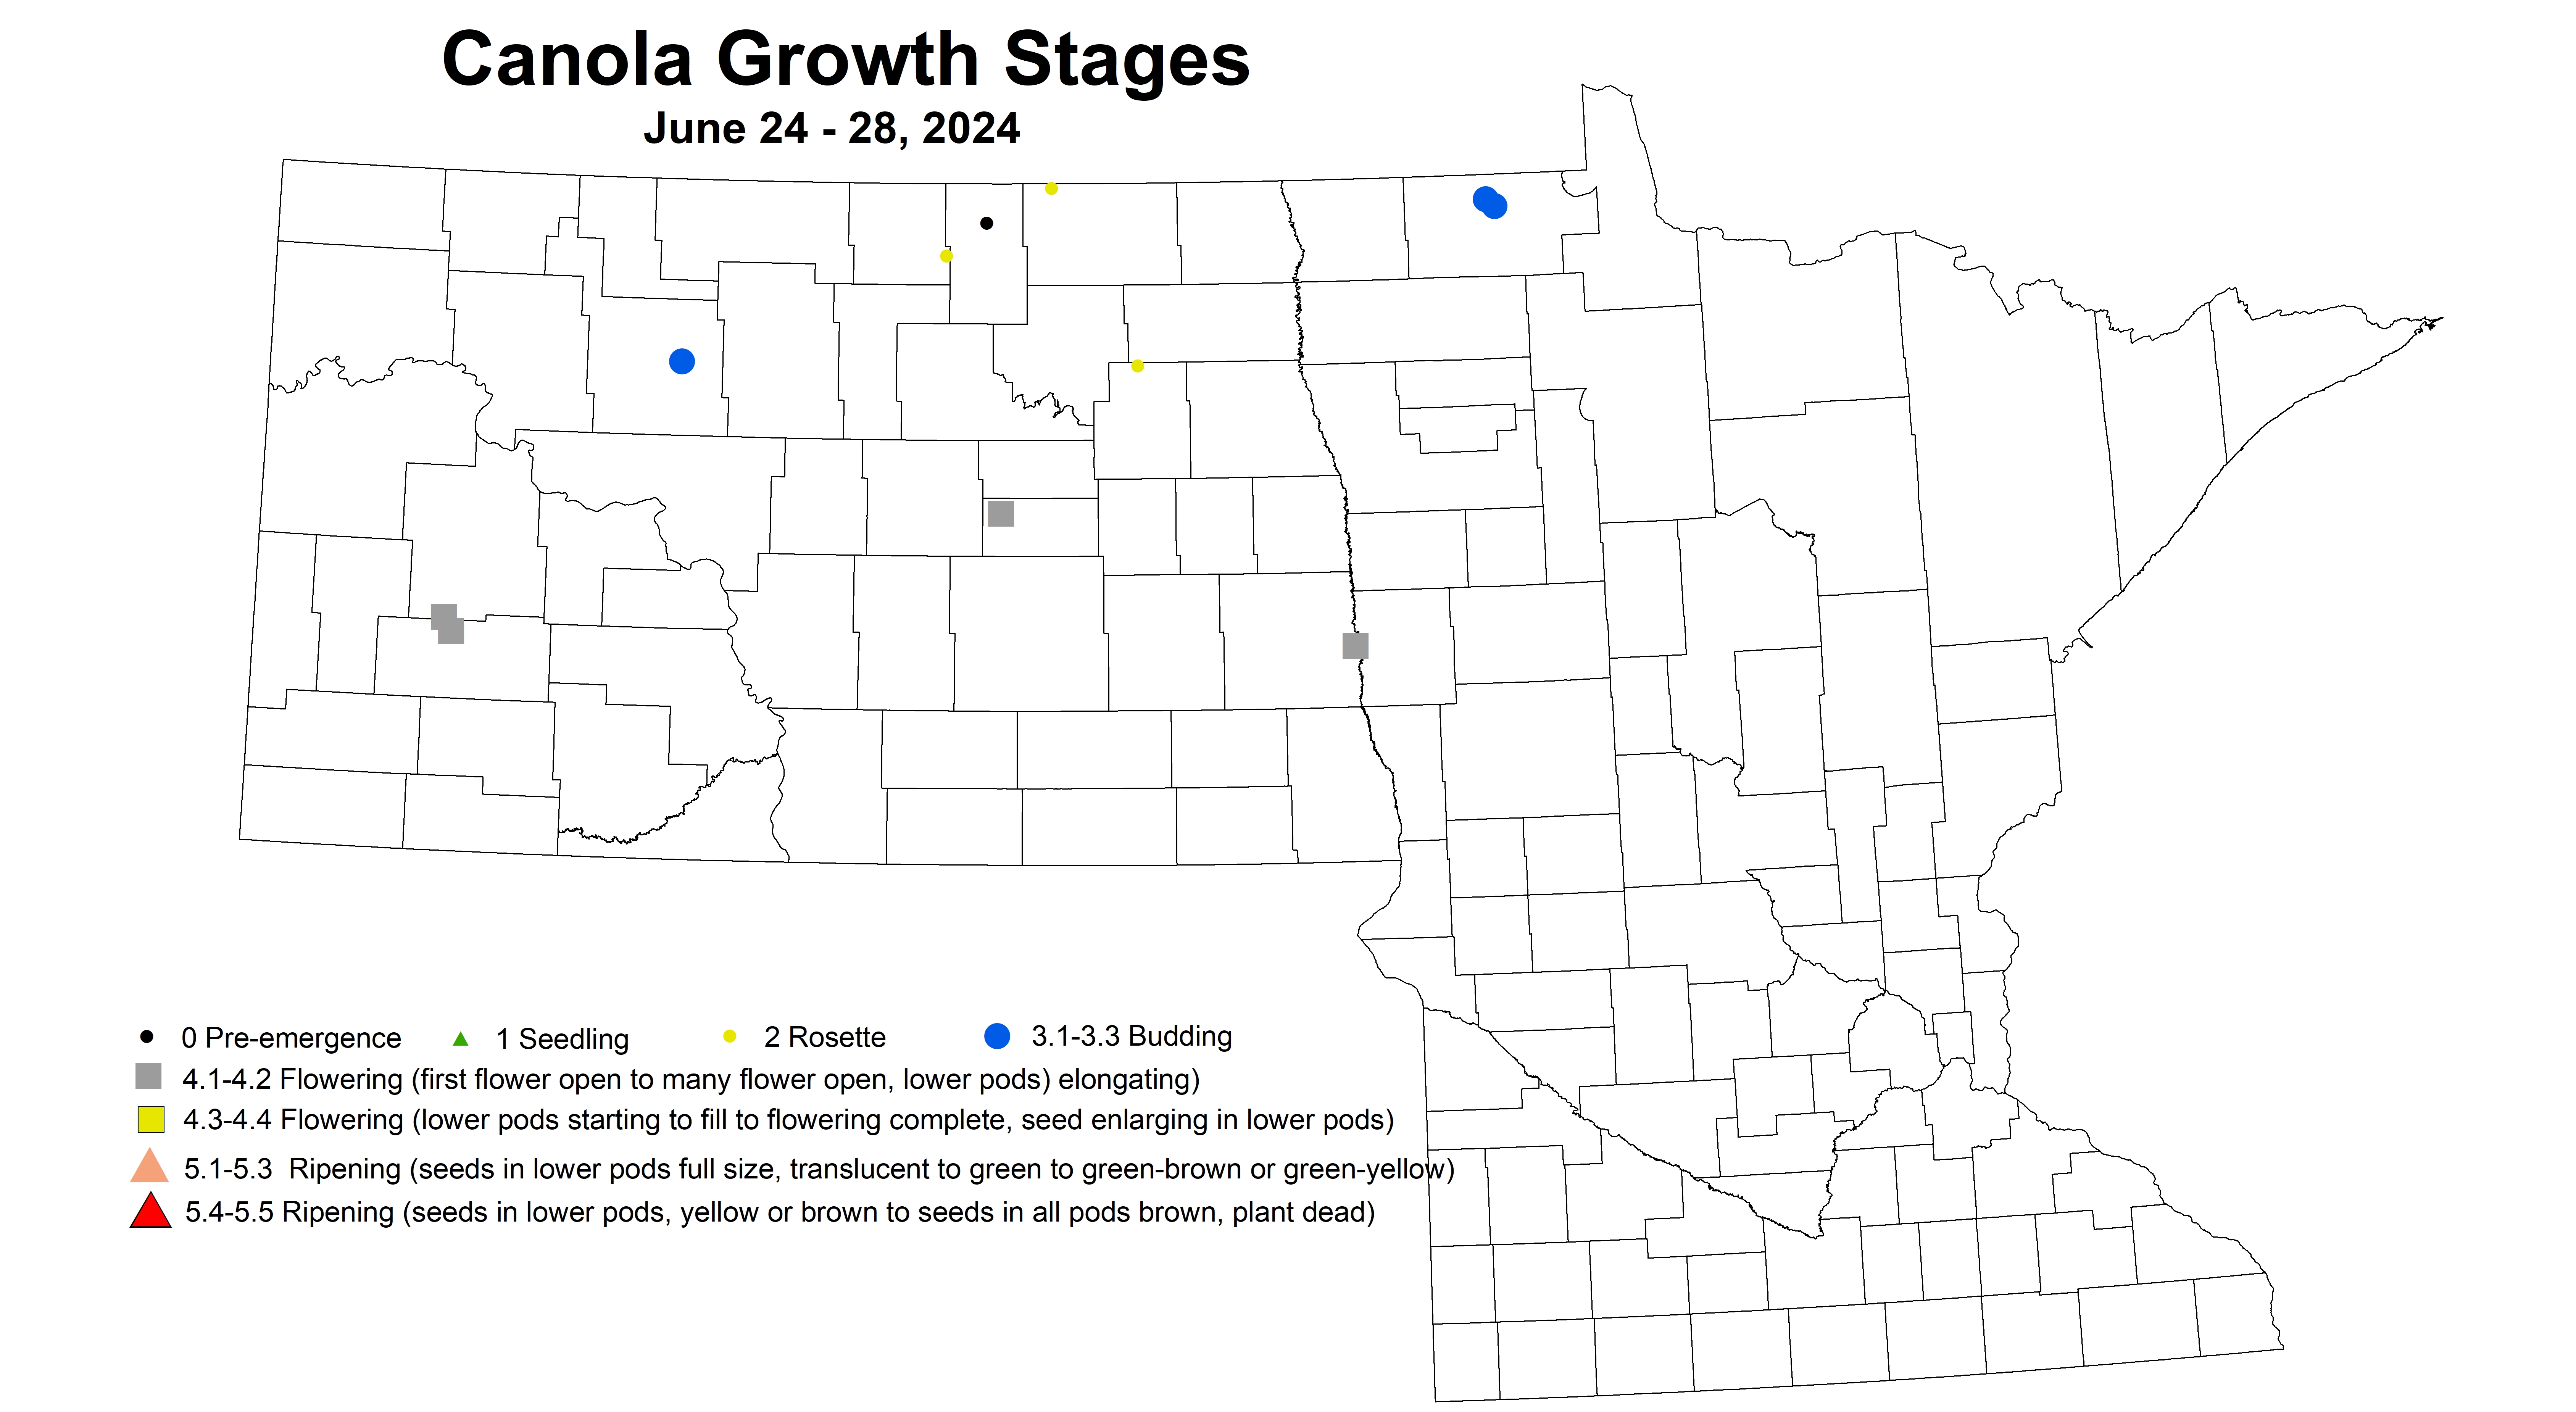 corrected canola growth stages 6.24-6.28 2024